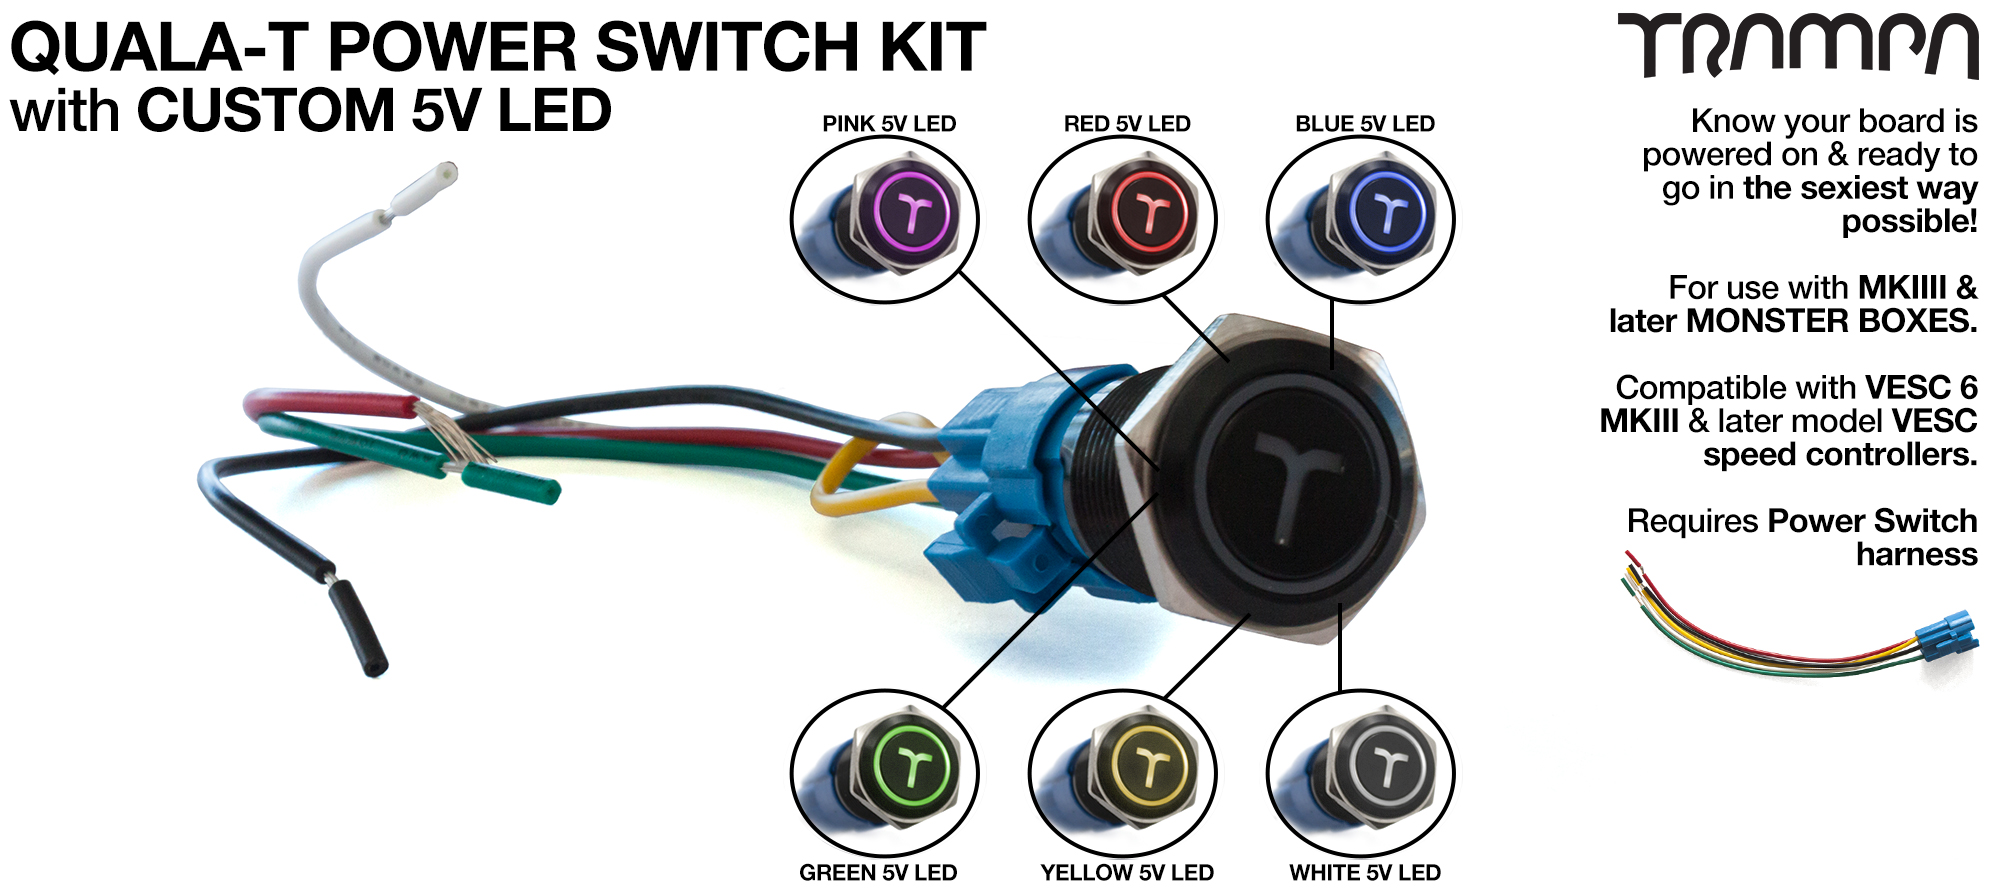 QUALA-T Power Switch Kit - Power Switch, 16mm Fixing Nut & Cable Harness. Blue, Red or White 5v LED